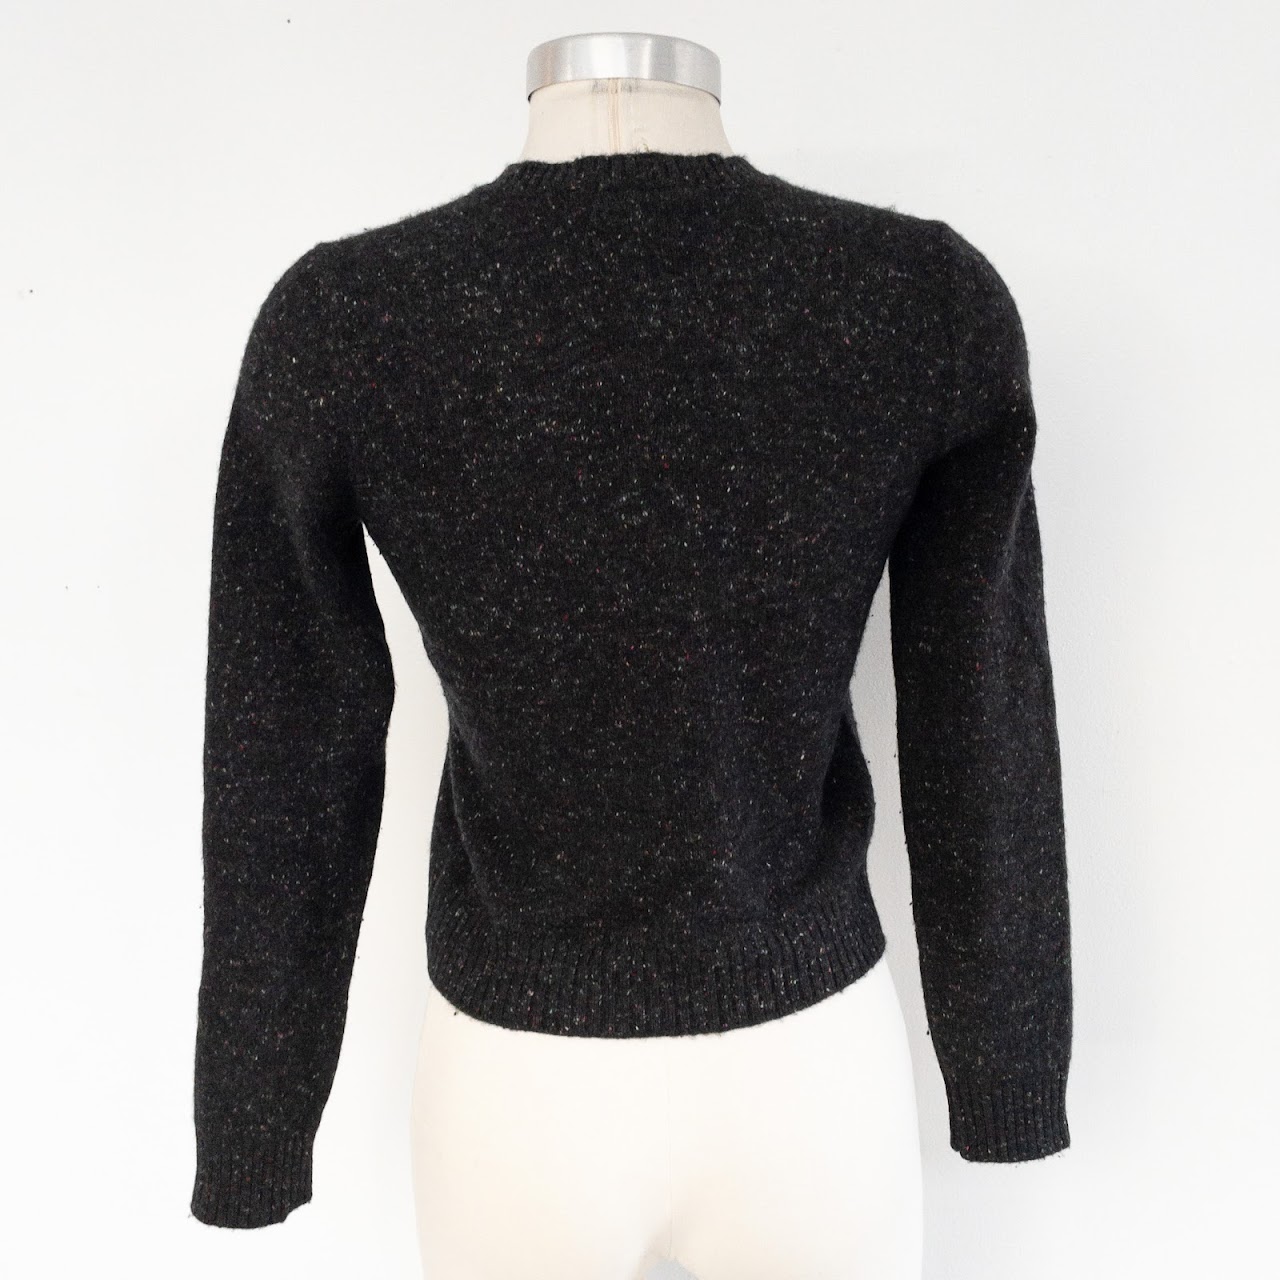 Chanel Cashmere Sweater